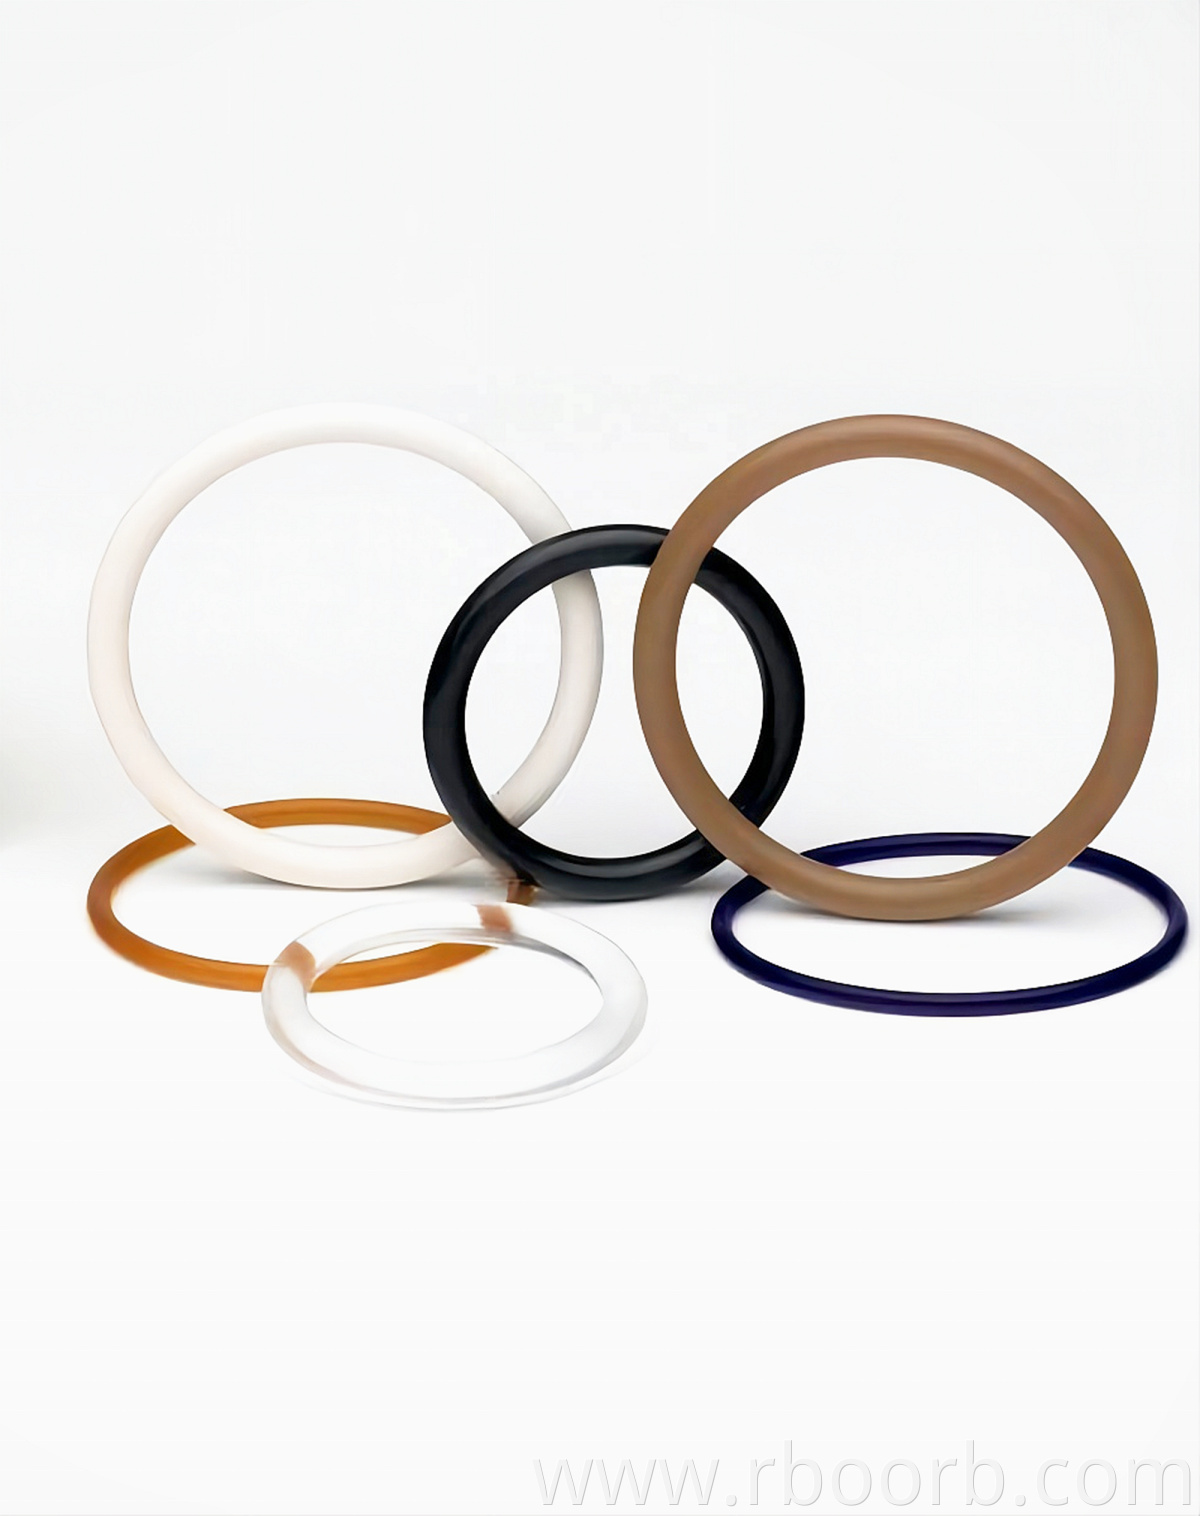 PTFE Coated wear-resisting customizable rubber seal O-rings